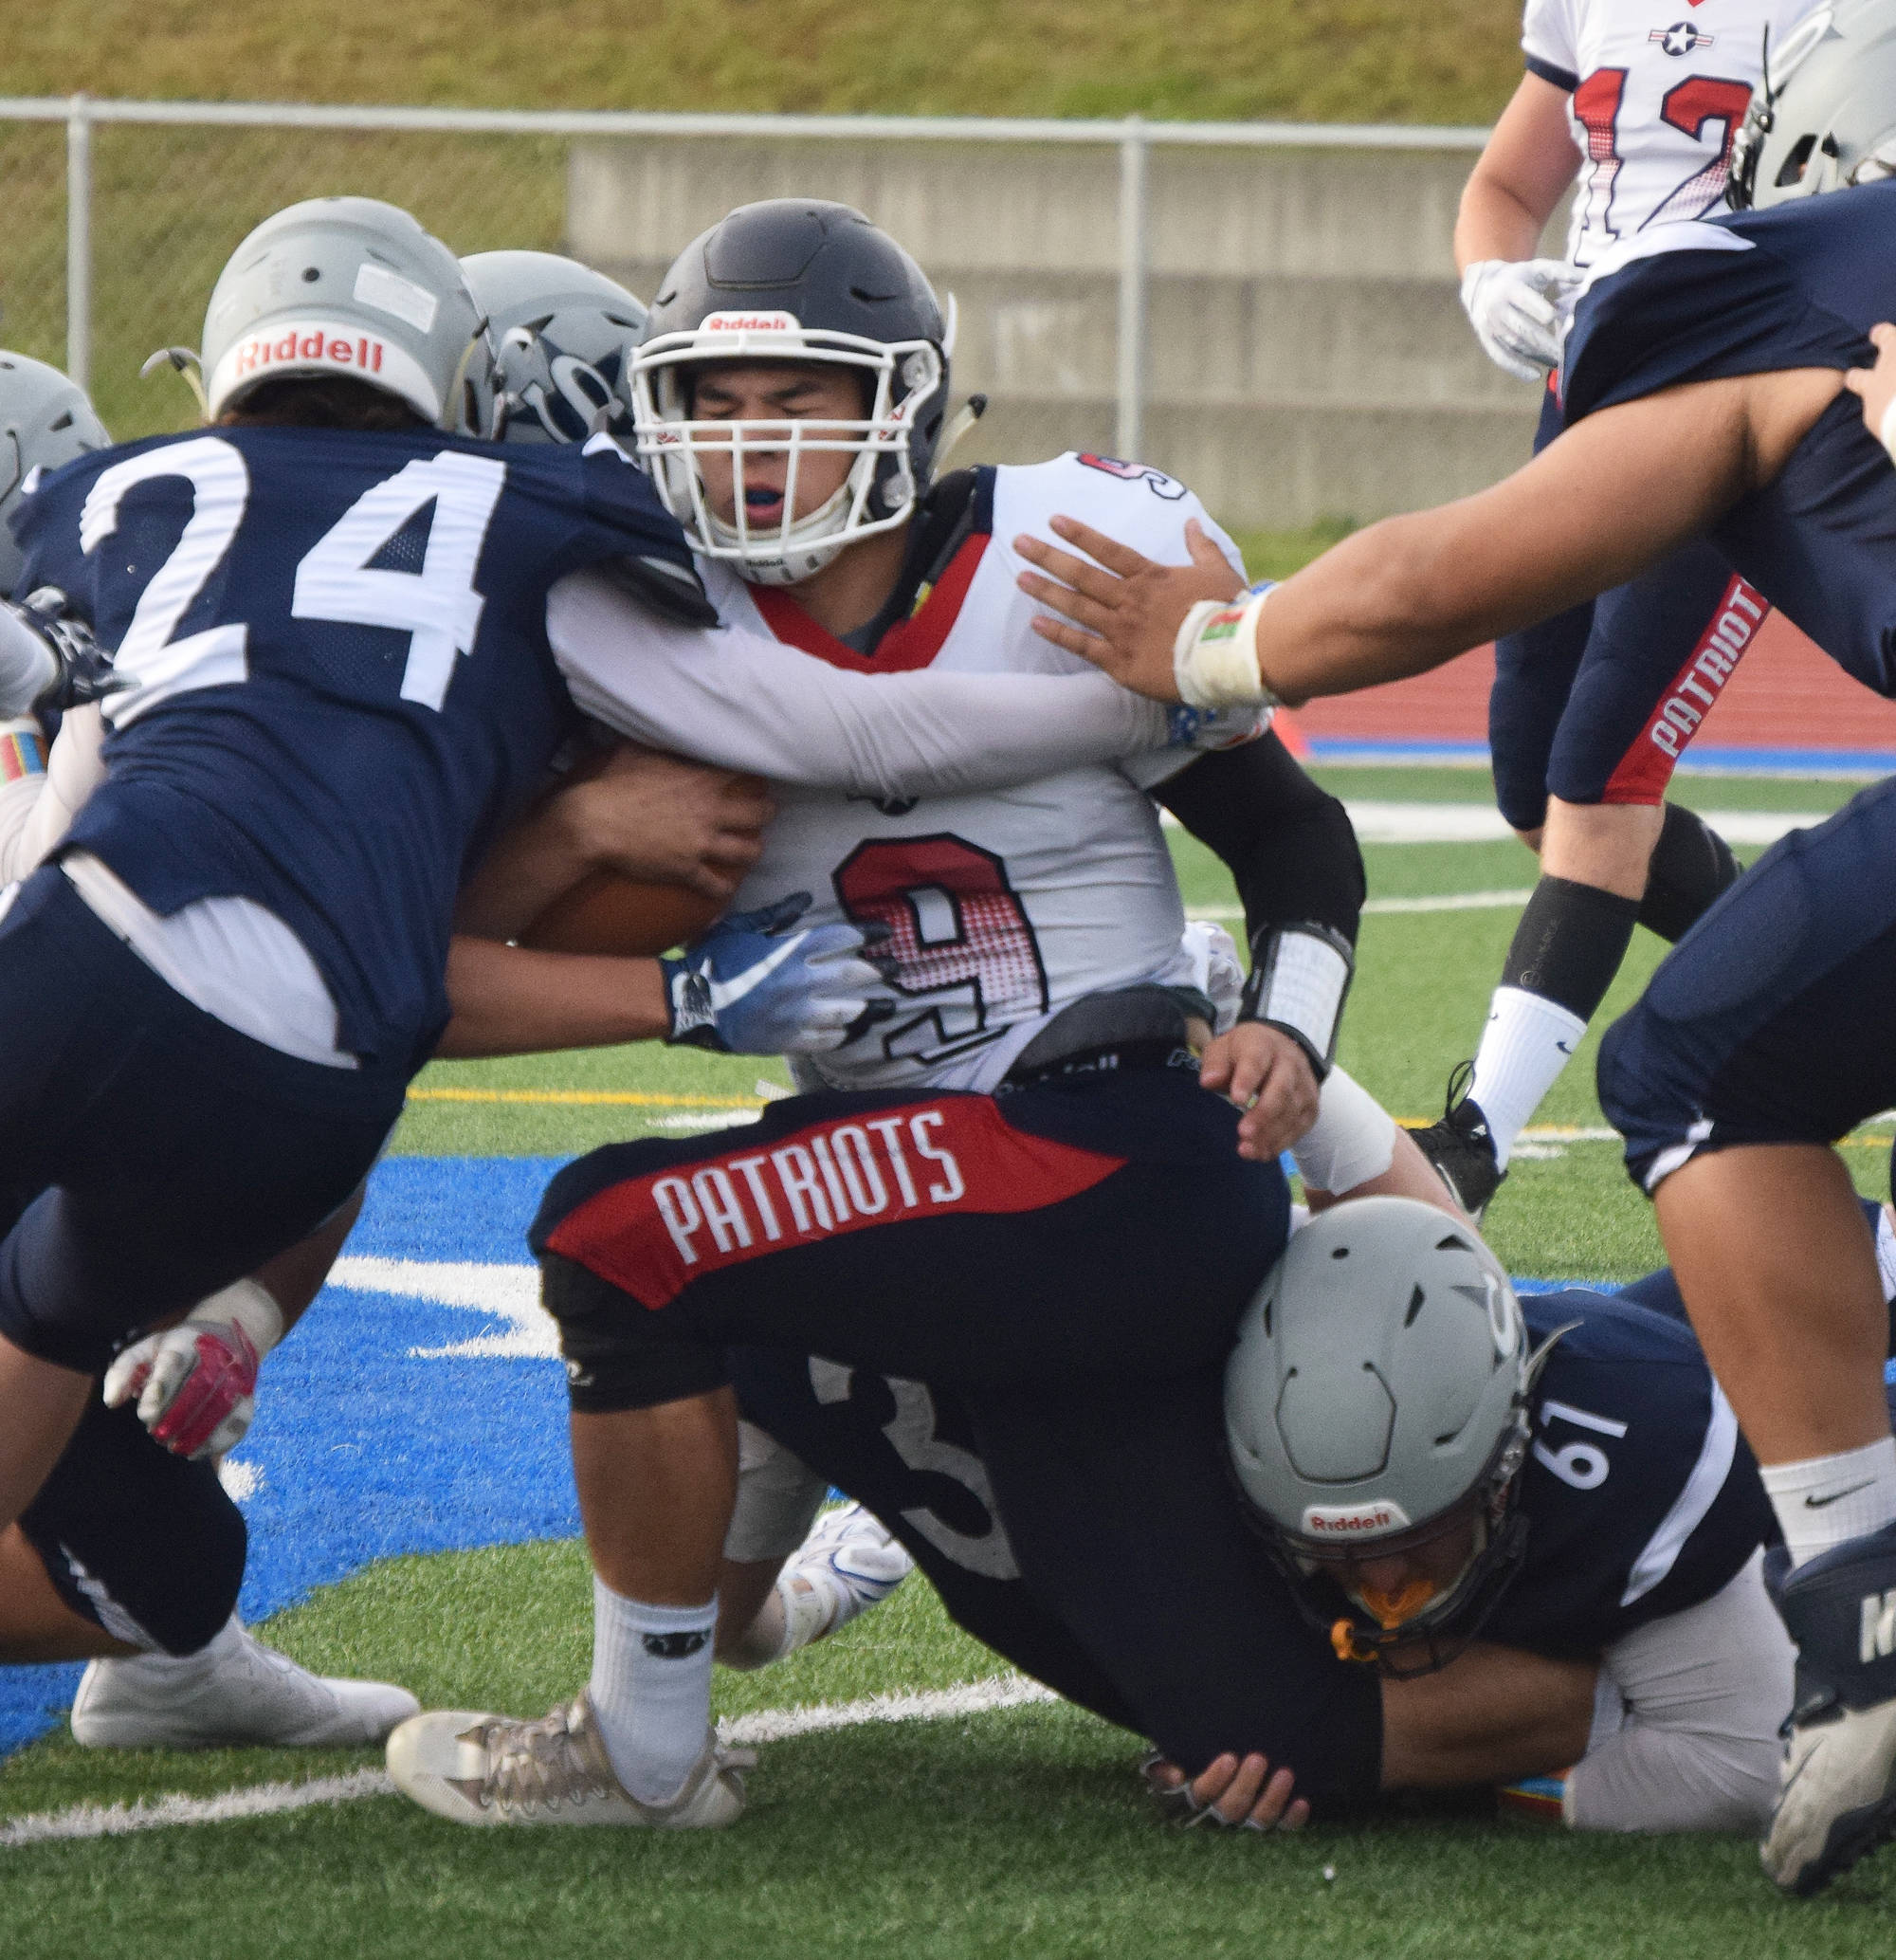 North Pole senior Bradley Antesberger (9) gets wrapped up by Soldotna defensive backs Cam Johnson (24) and Levi Benner (61) Friday at Soldotna’s Justin Maile Field. (Photo by Joey Klecka/Peninsula Clarion)